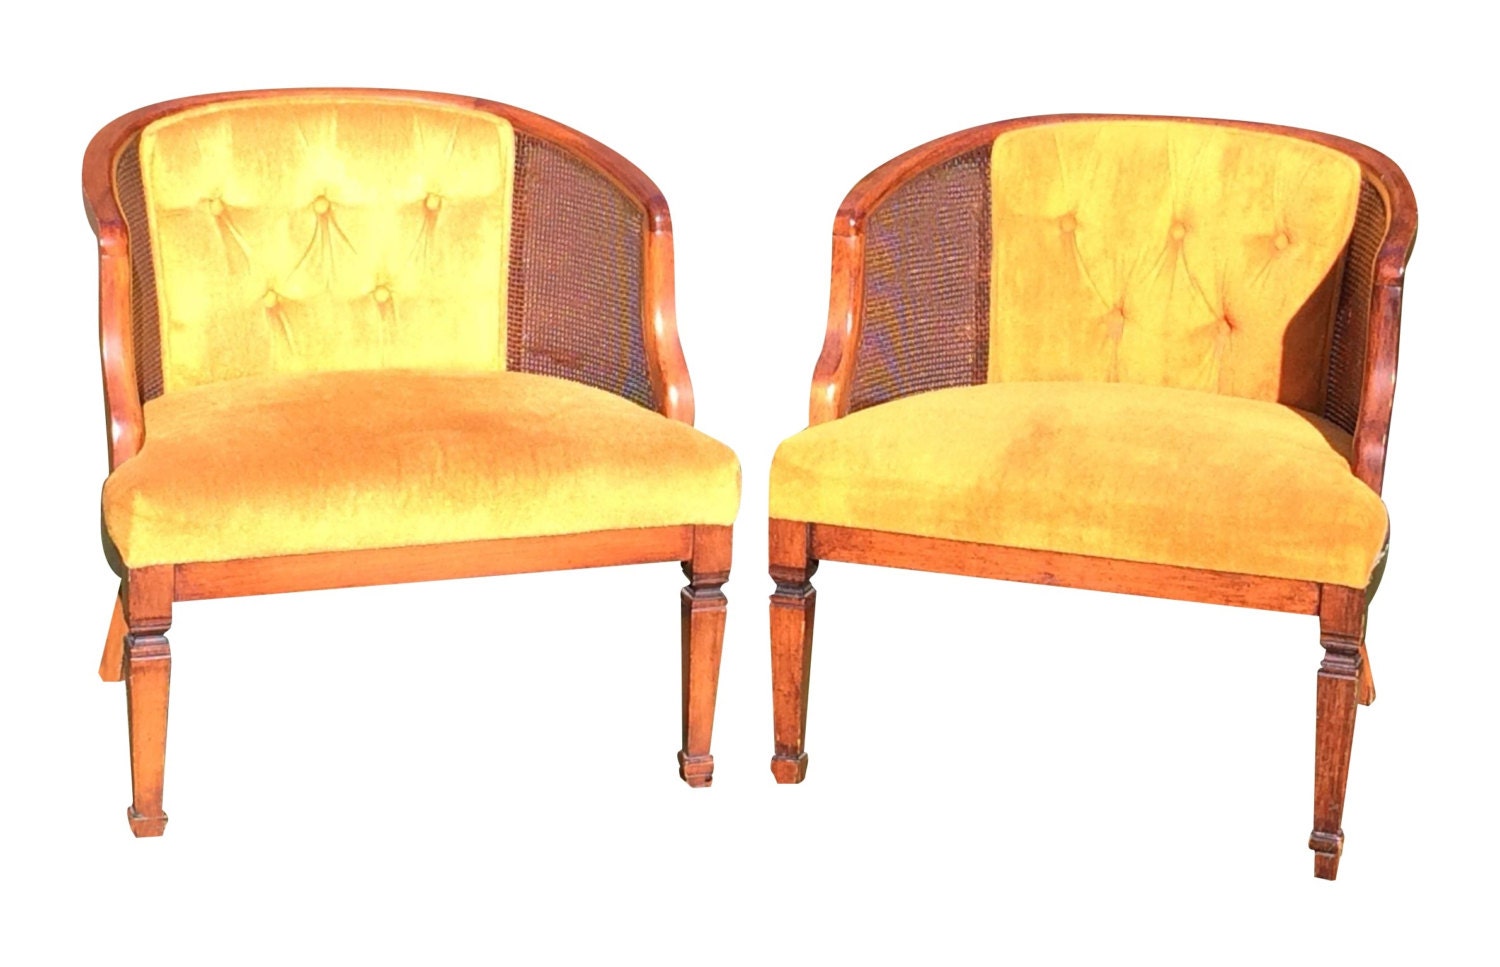 Vintage Cane Barrel Chairs Tufted Mustard Yellow Velvet A